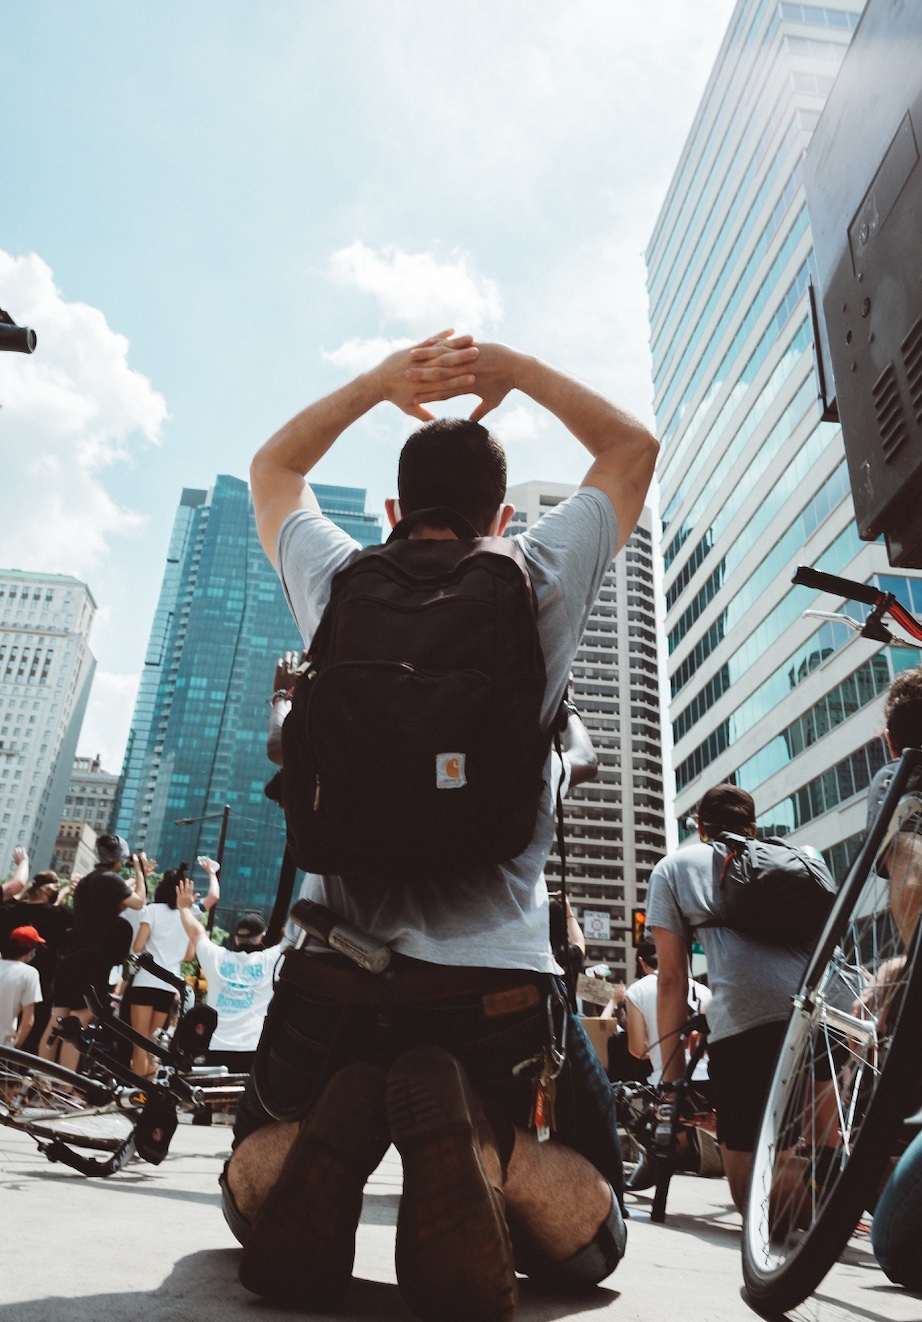 Man with backpack on knees with hands in the air; image by Chris Henry, via Unsplash.com.